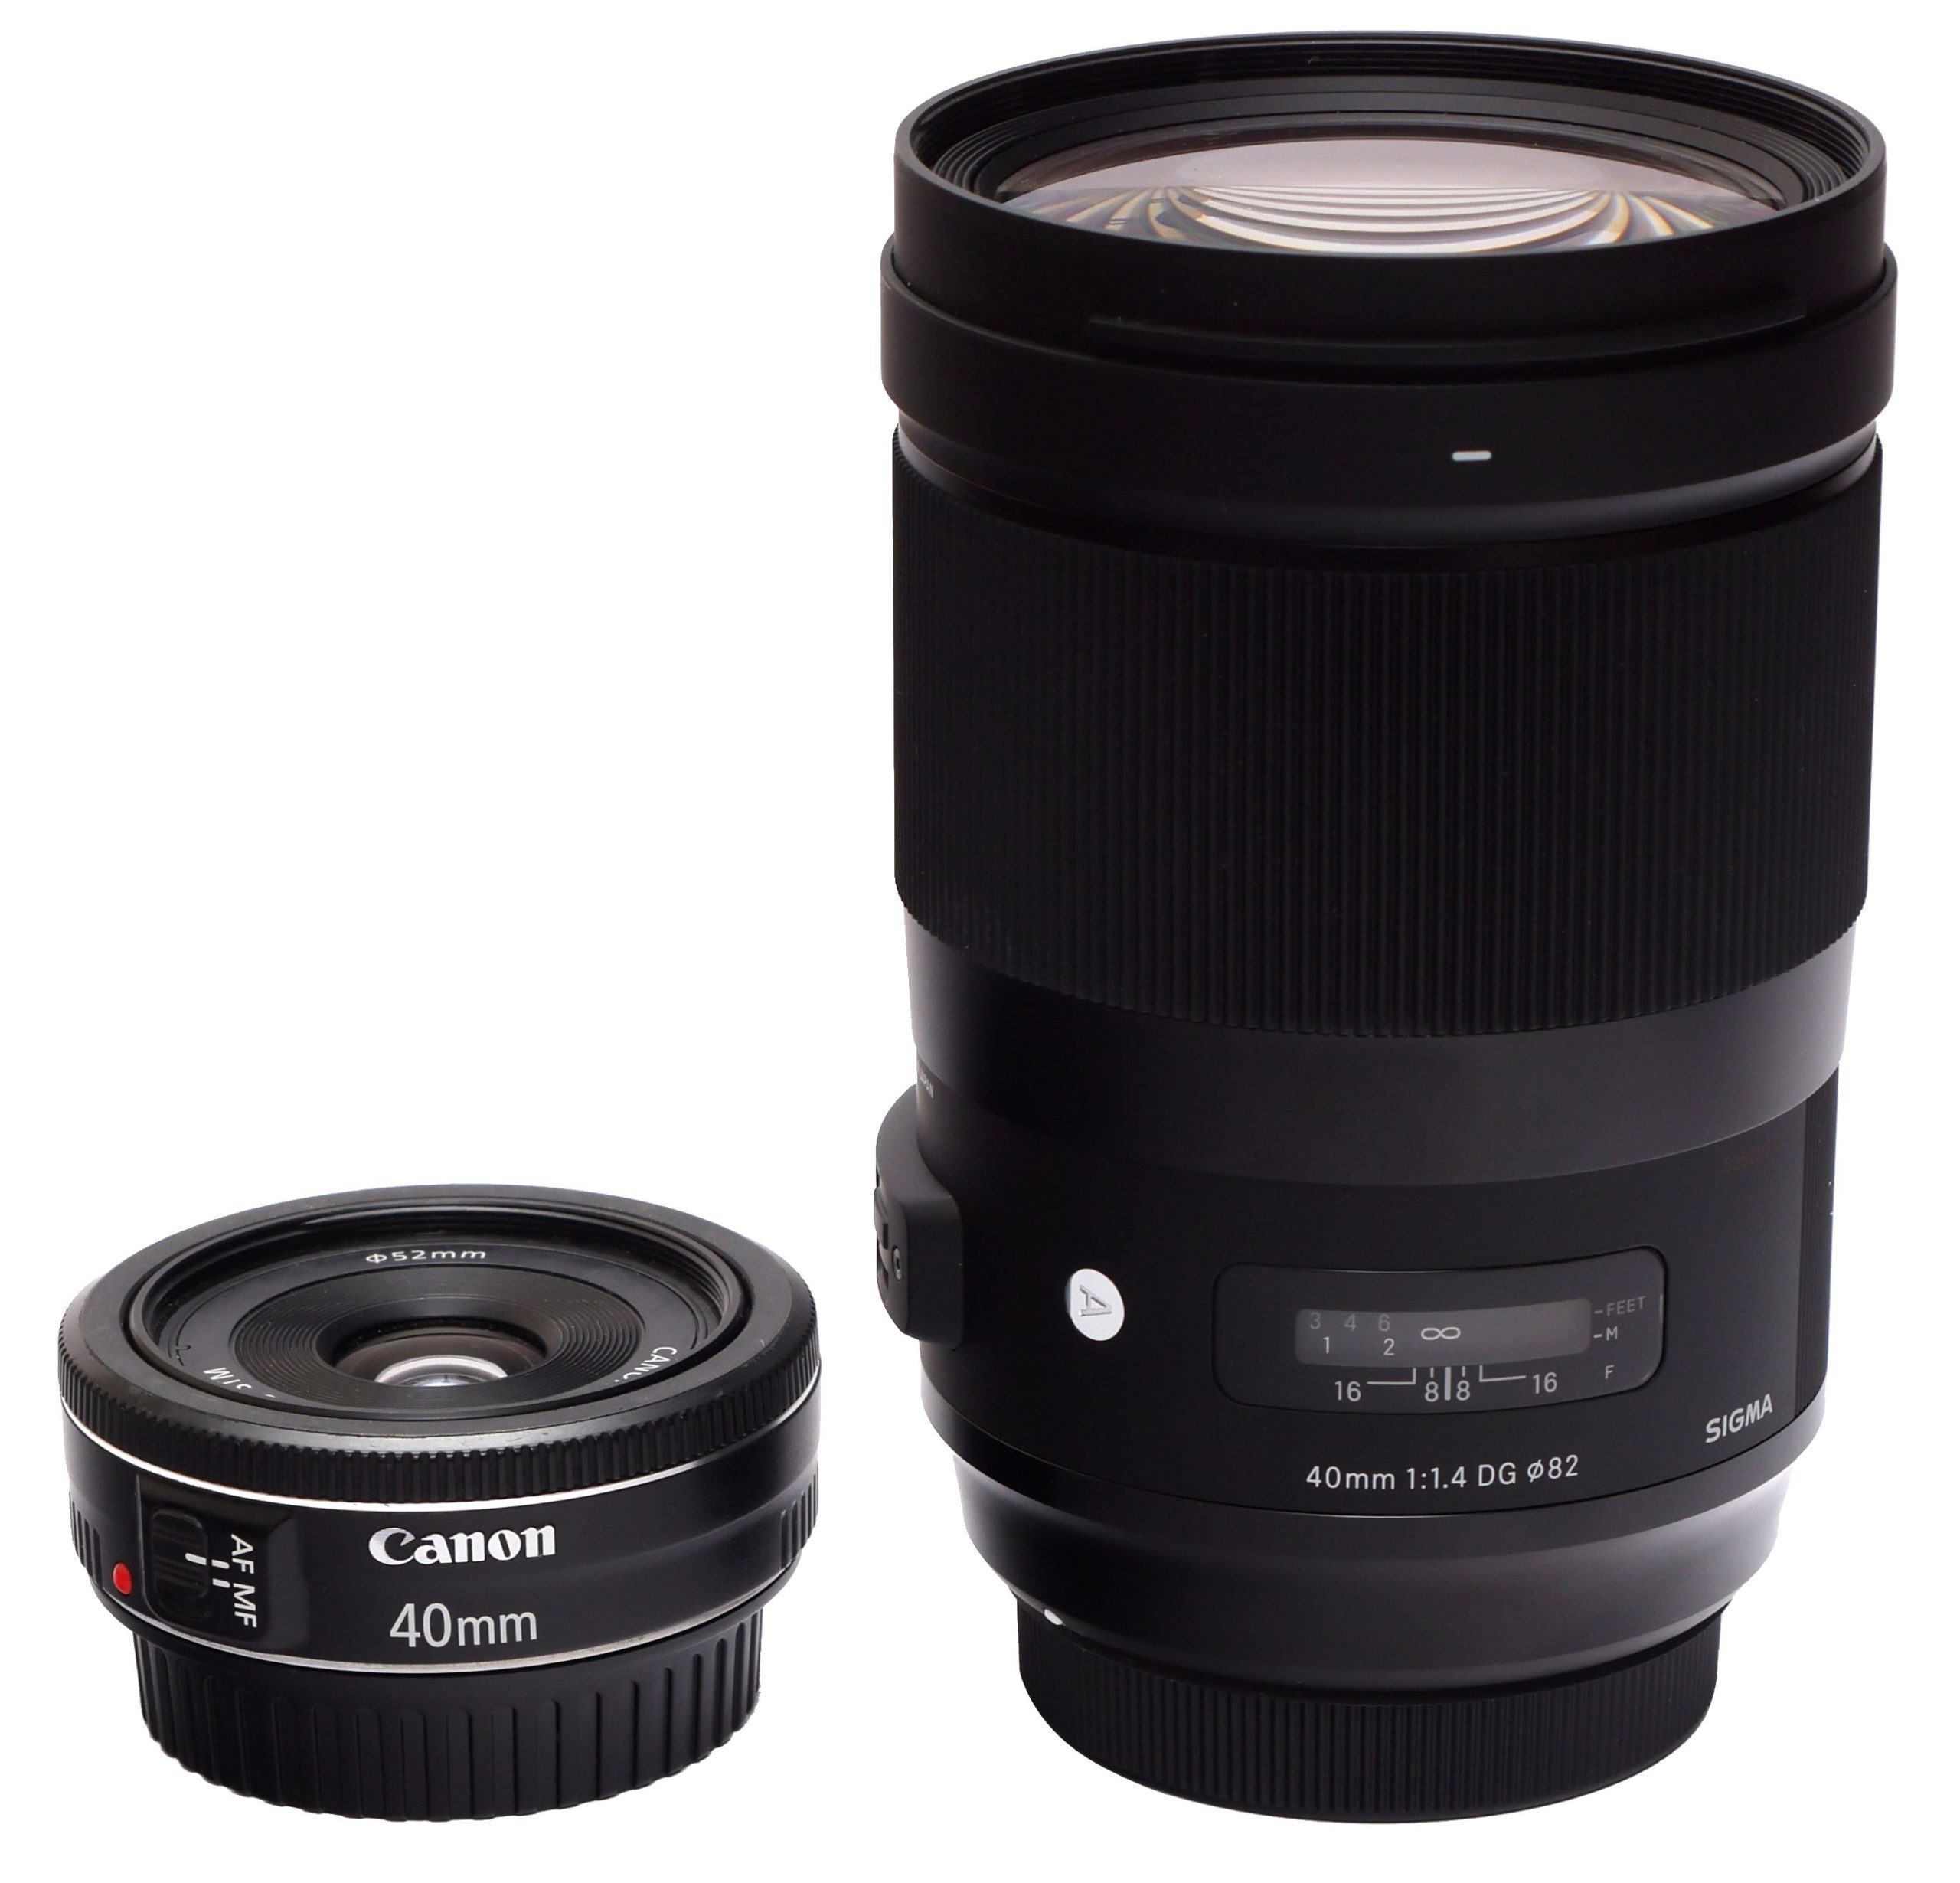 Sigma 40. Canon EF 40mm 1:2.8 STM. Sigma 40 1.4 Art Canon. Canon EF 40mm f/2.8 STM. Sigma 40mm f1.4.